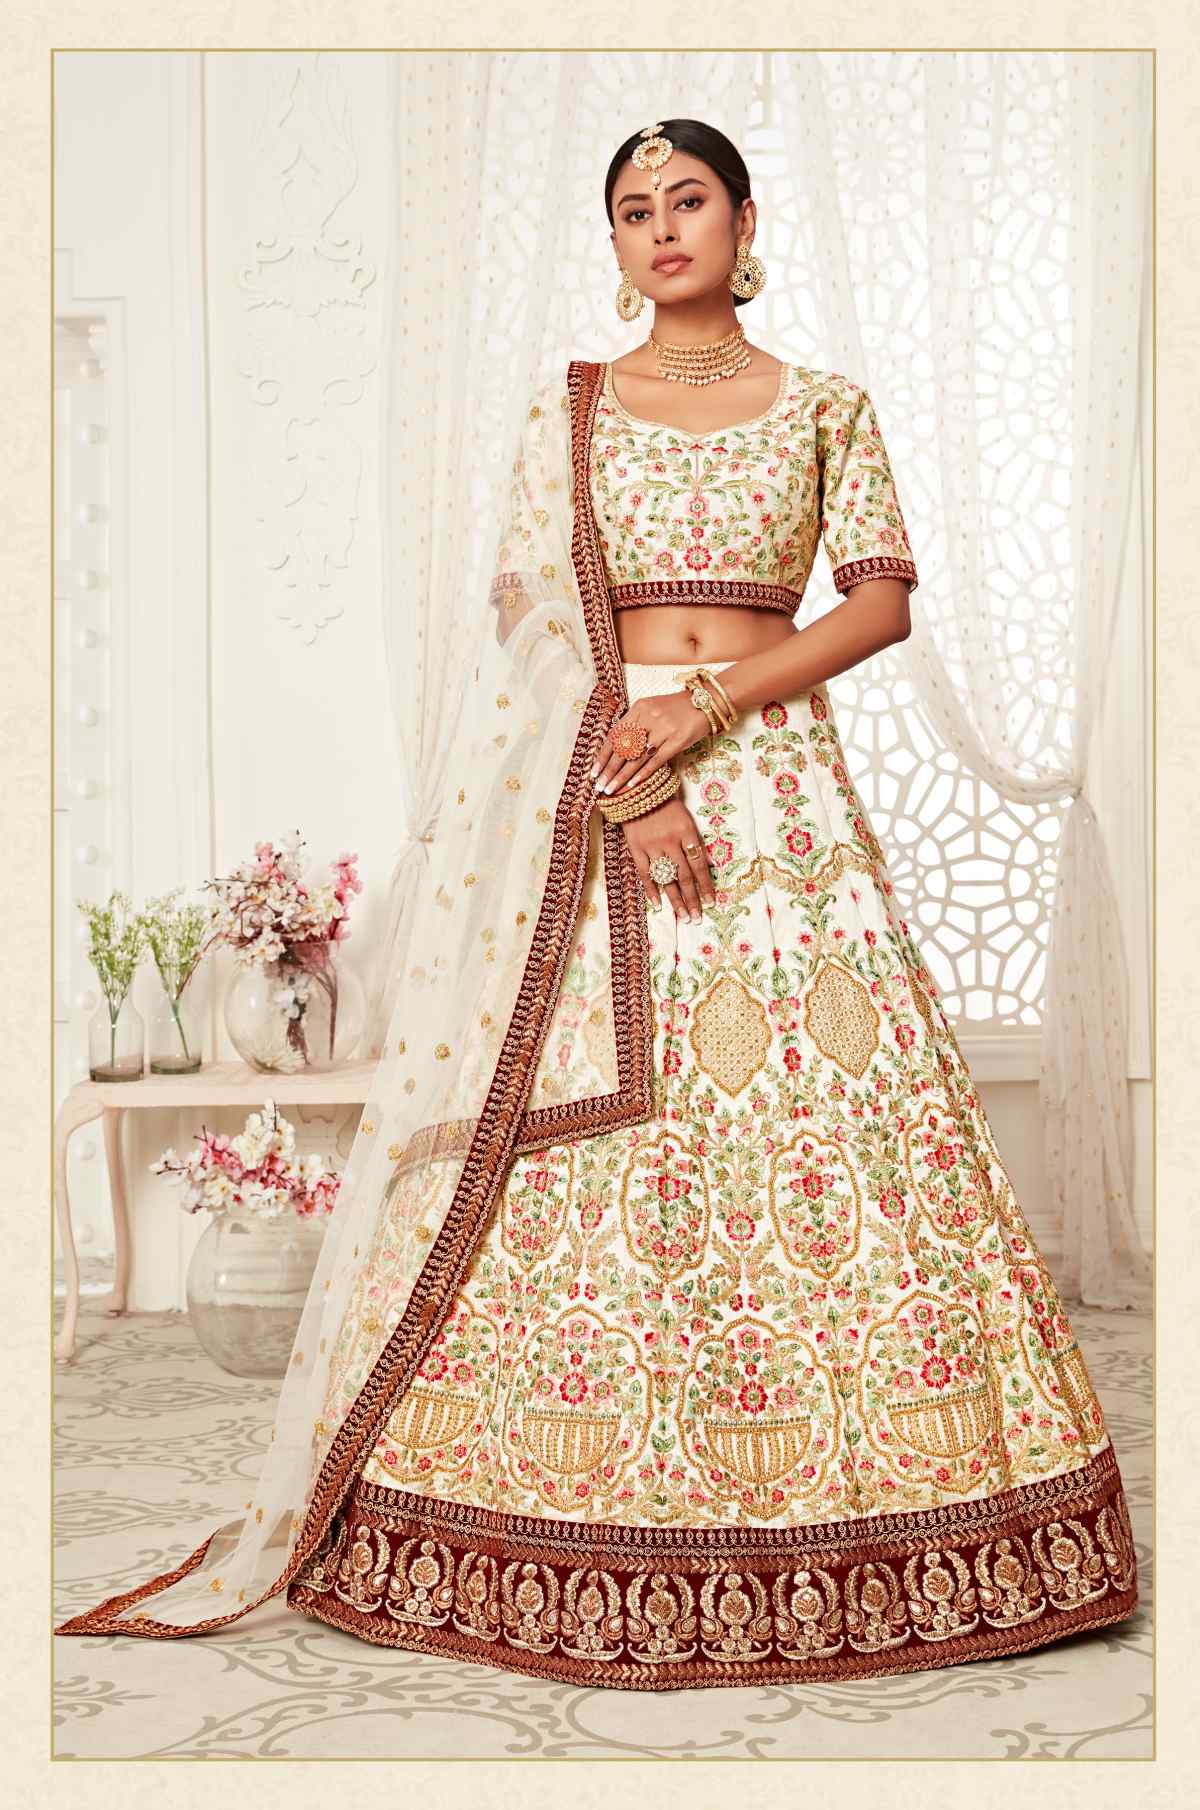 Ready to Wear Lehenga Choli for Girls in Green Color – Roop Sari Palace